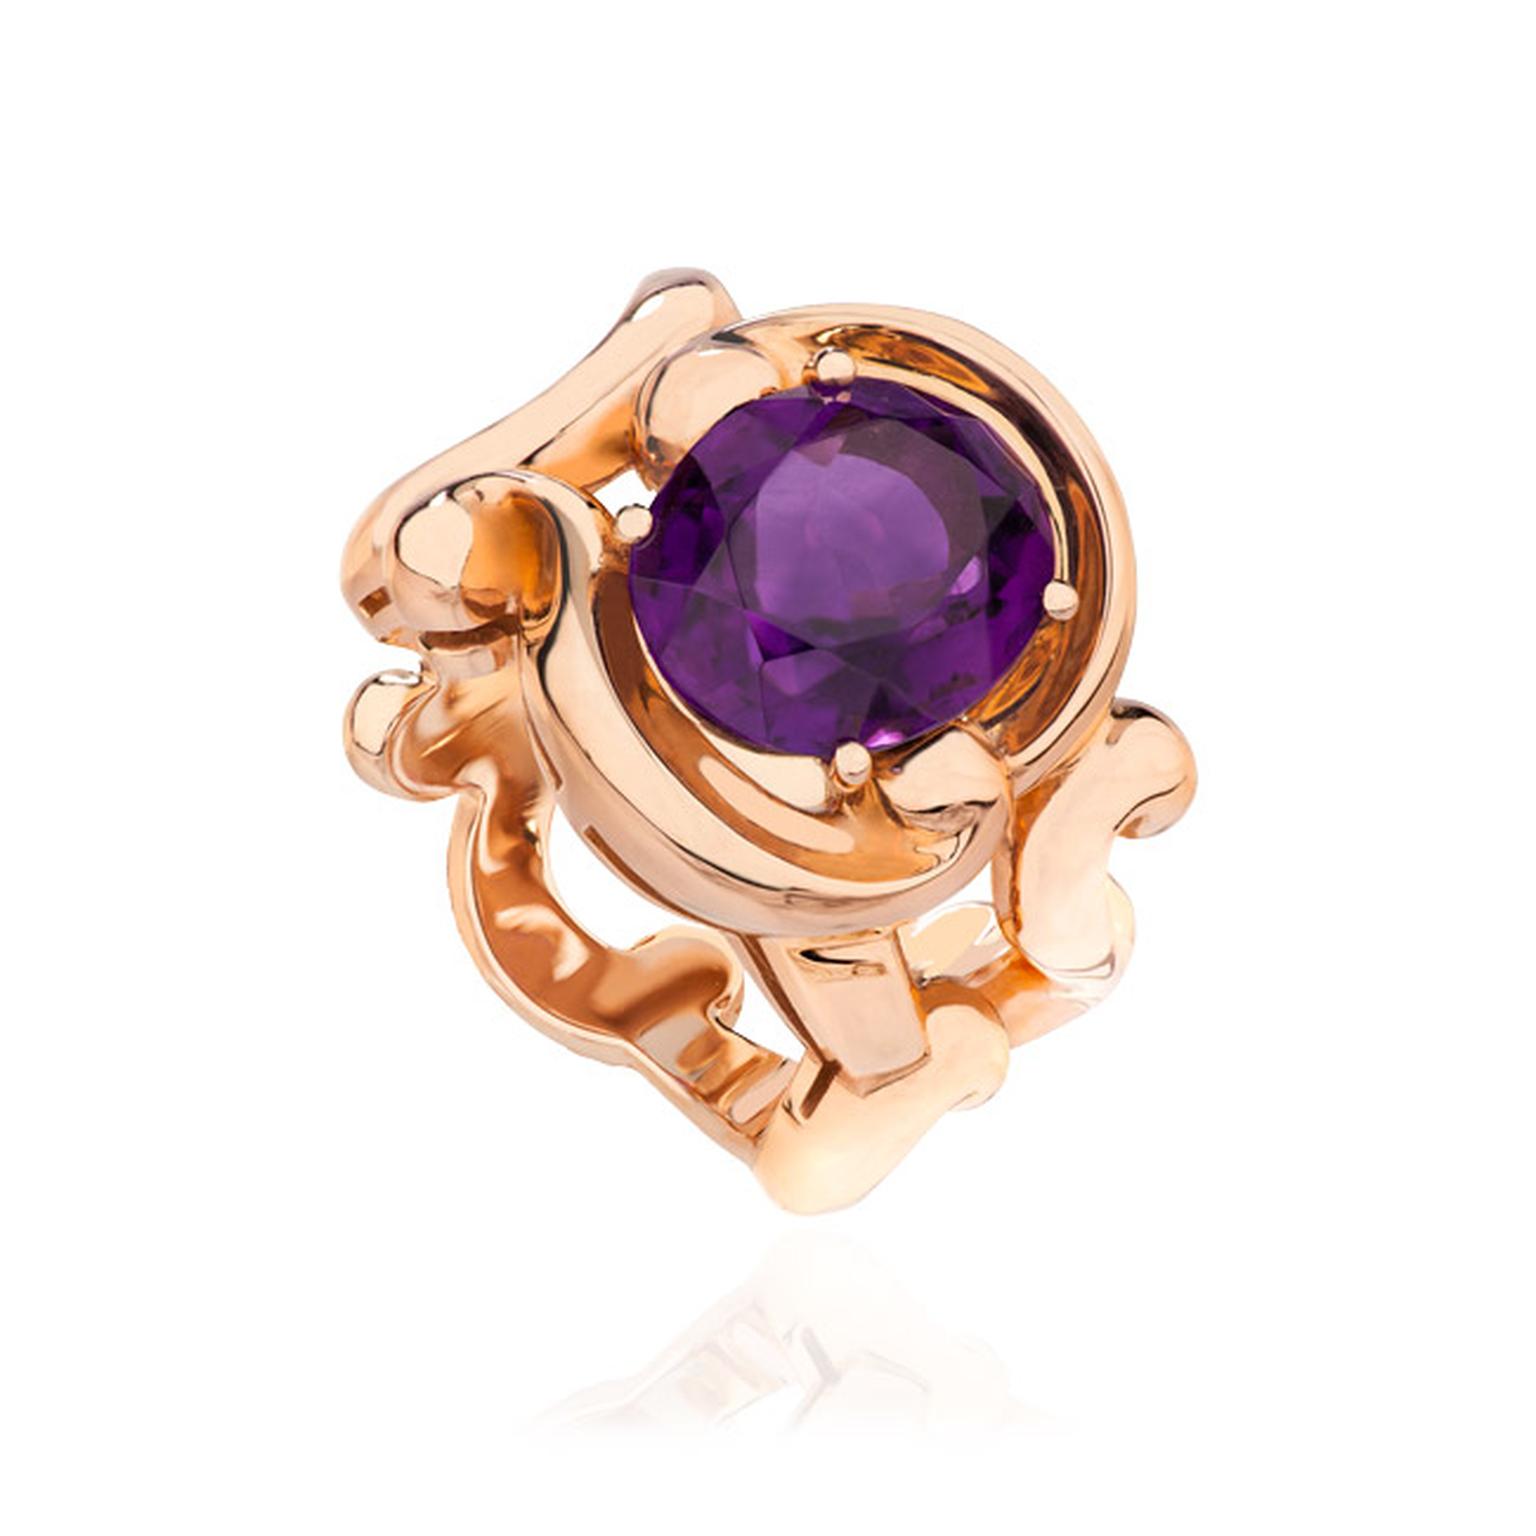 Faberge-Rococo-amethyst-ring-Main